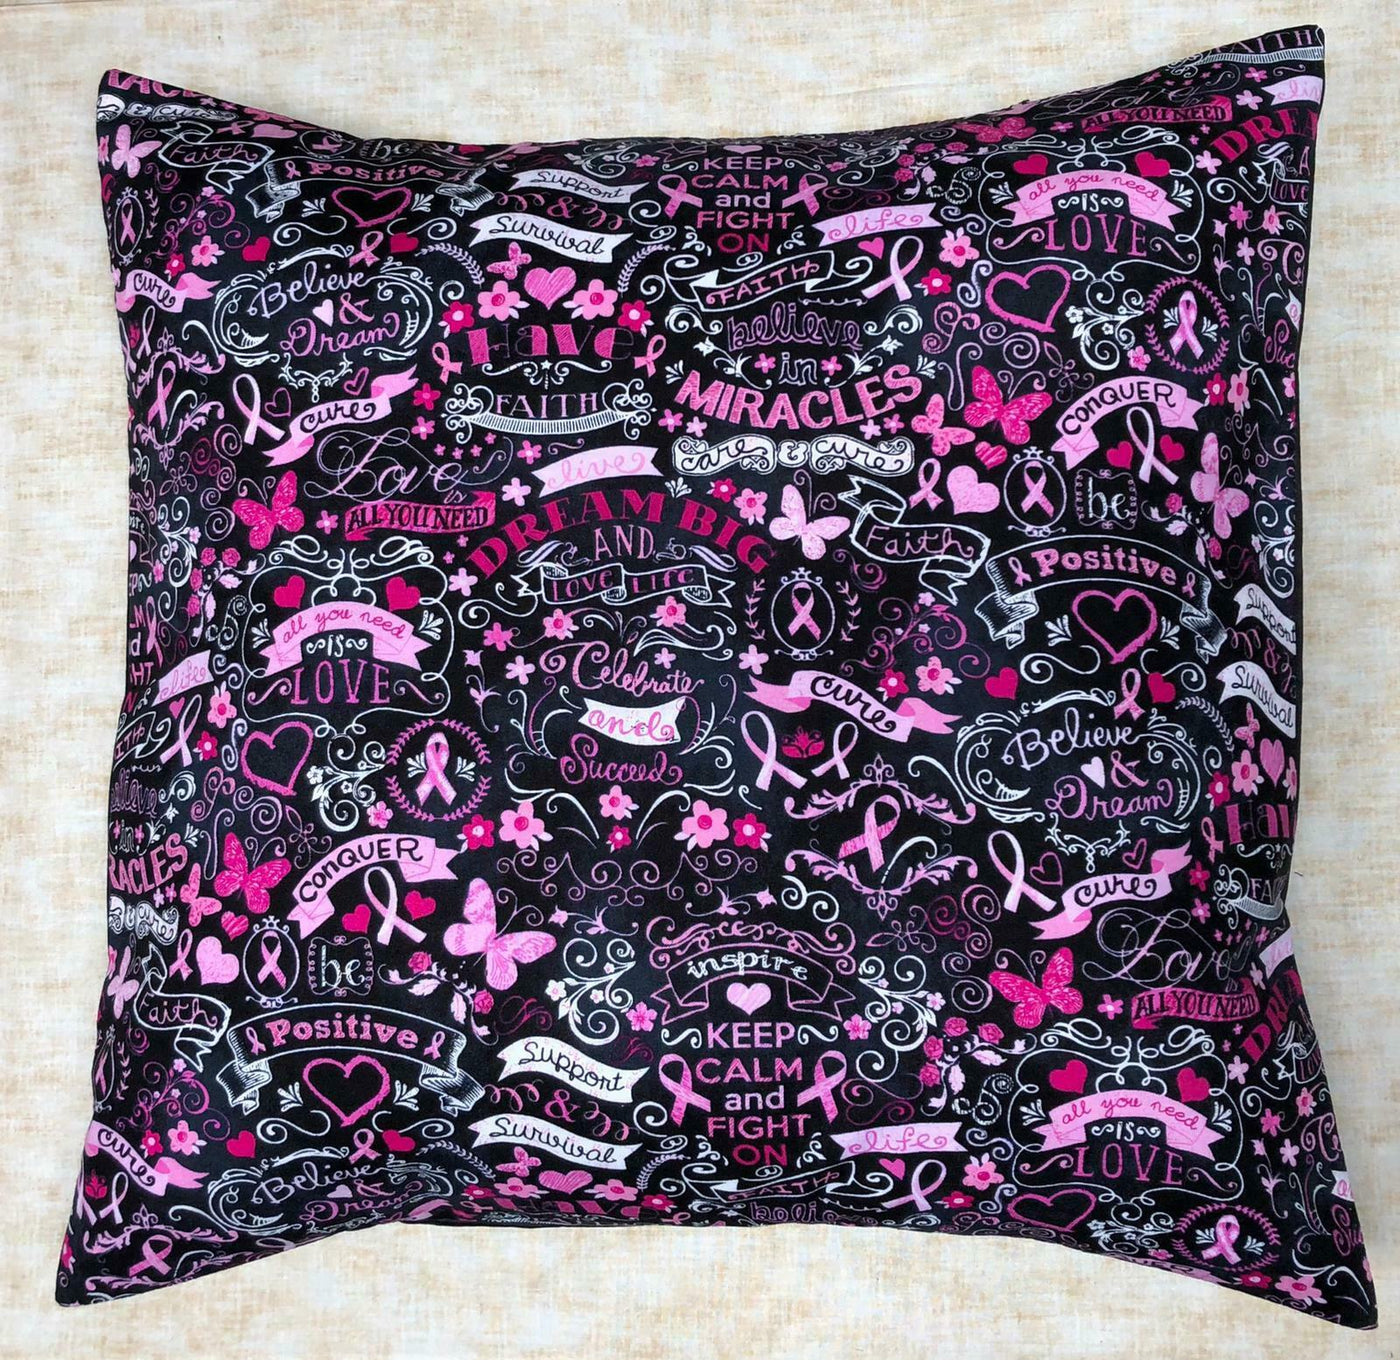 Breast Cancer Aware Cushion Cover - Timeless Treasures - 100% Cotton Fabric